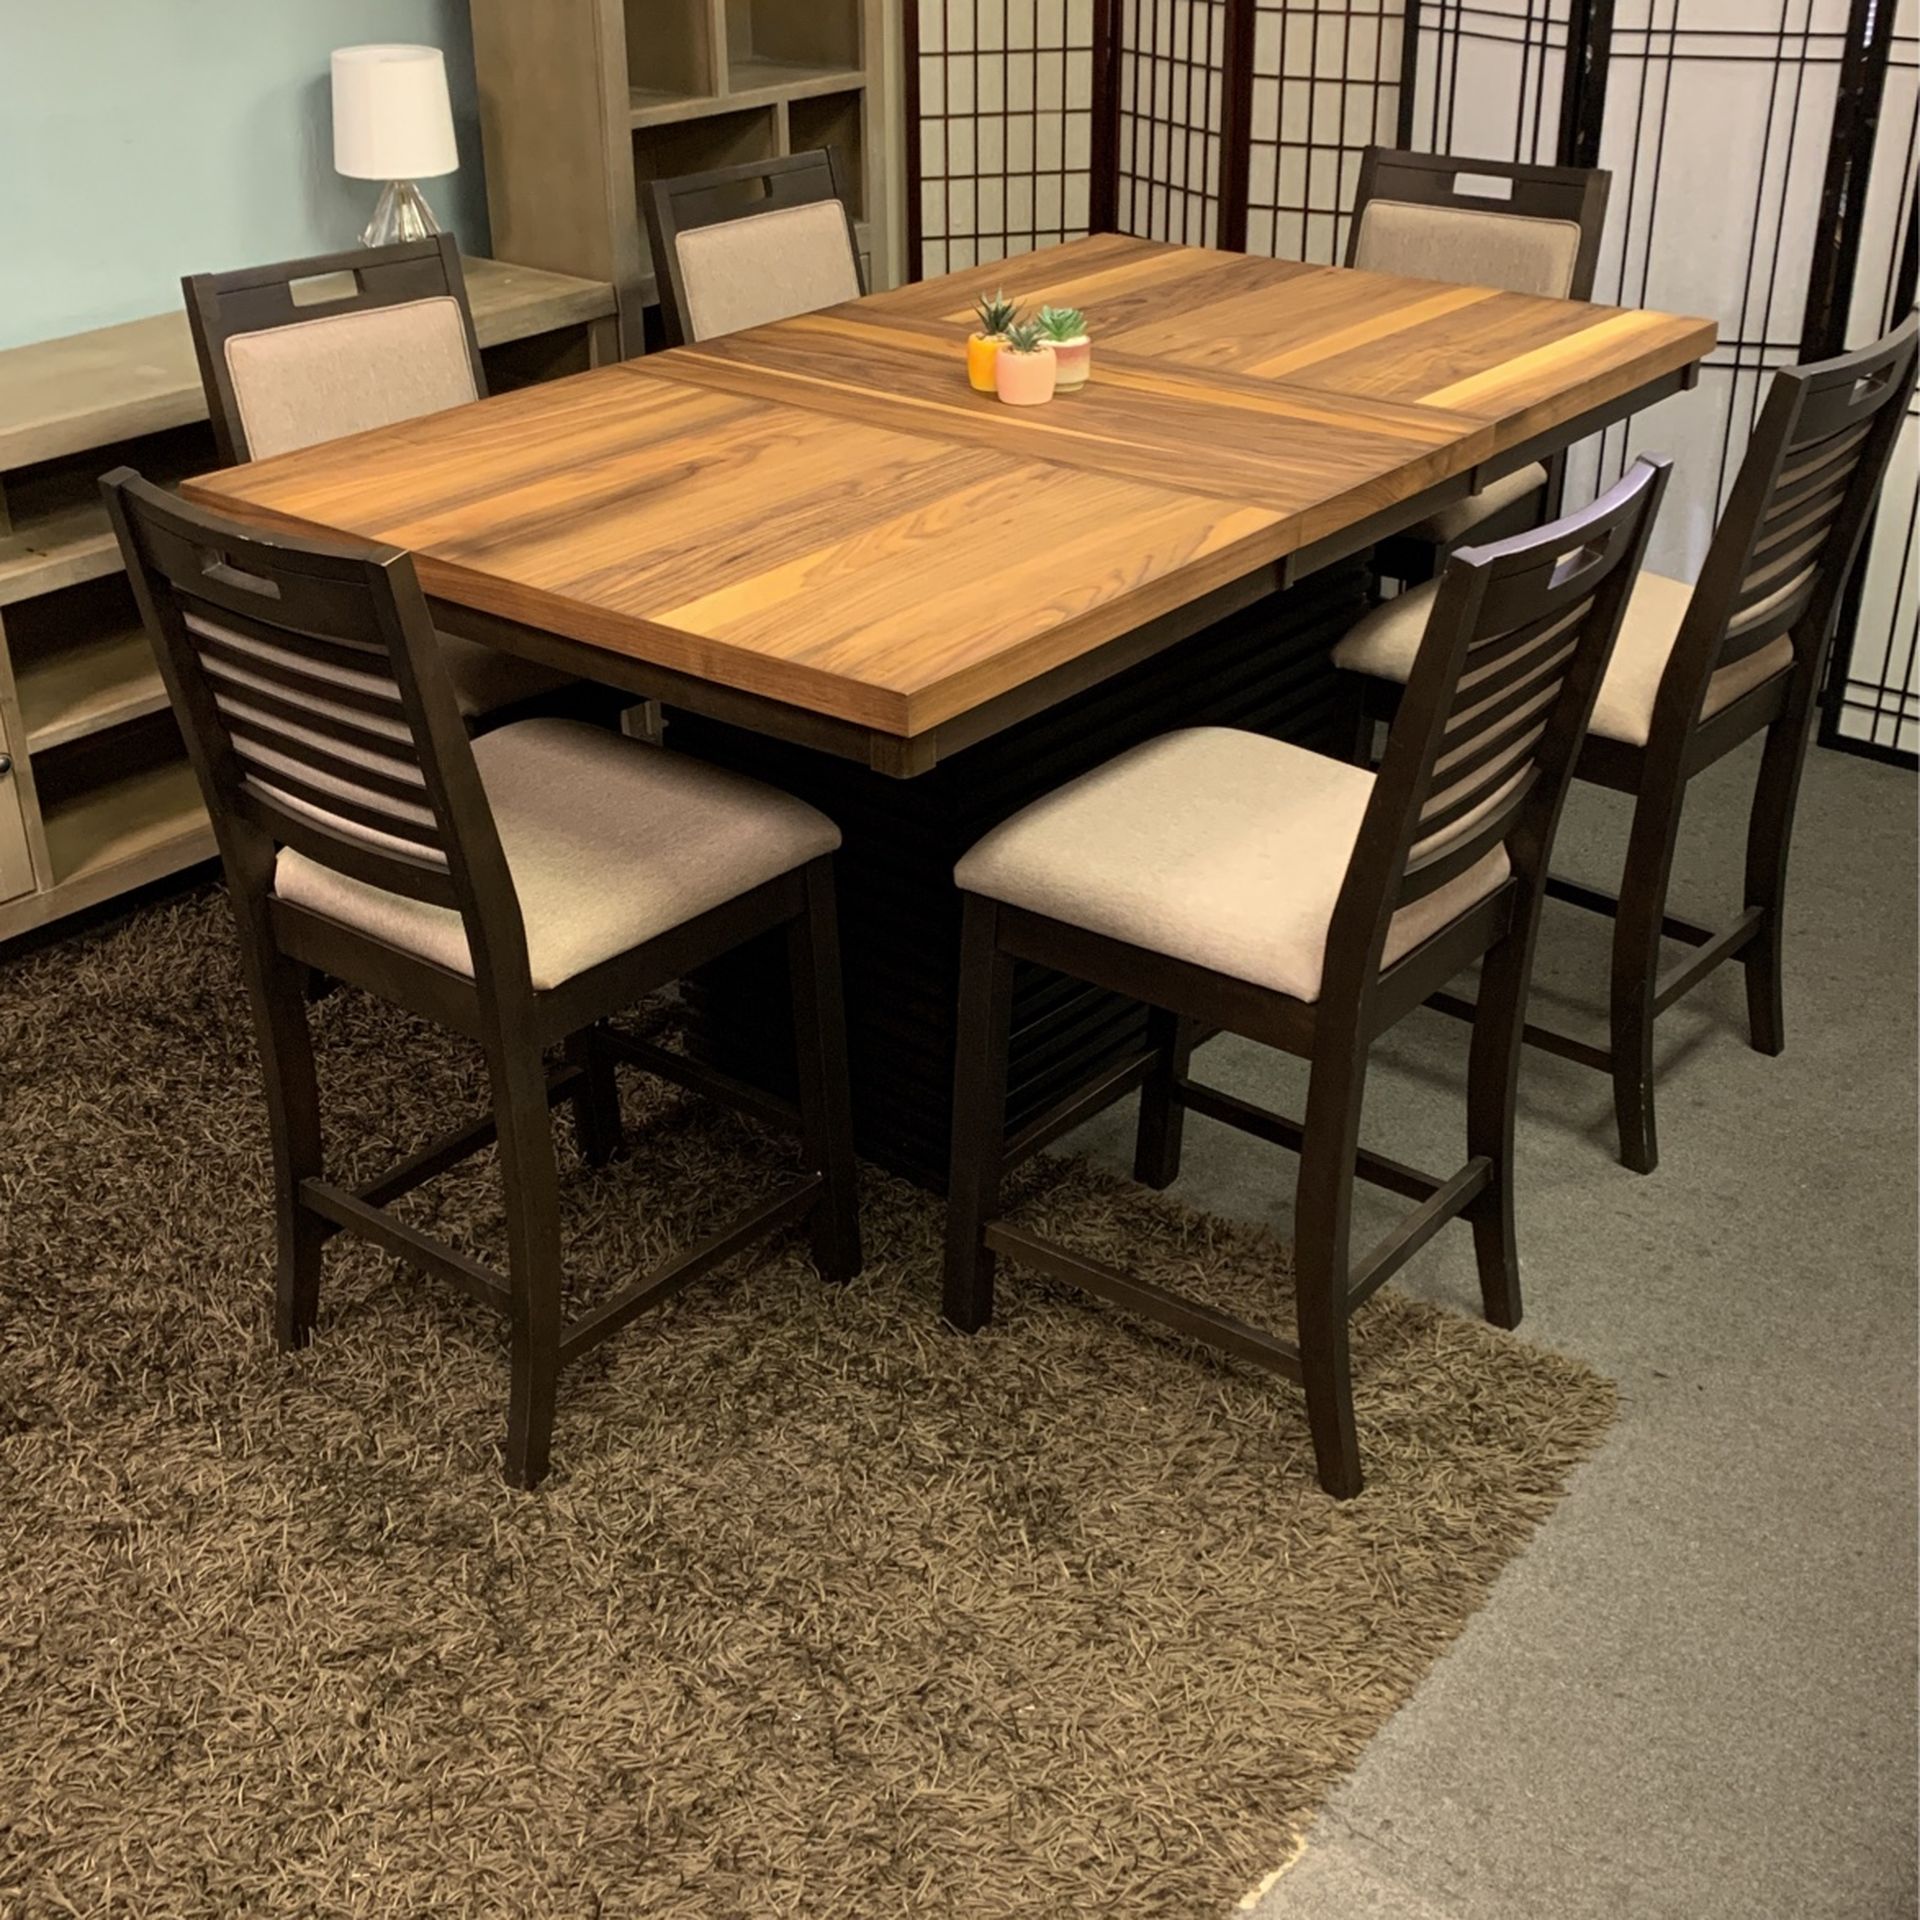 7 Piece Dining Table Set ($10 Delivery)